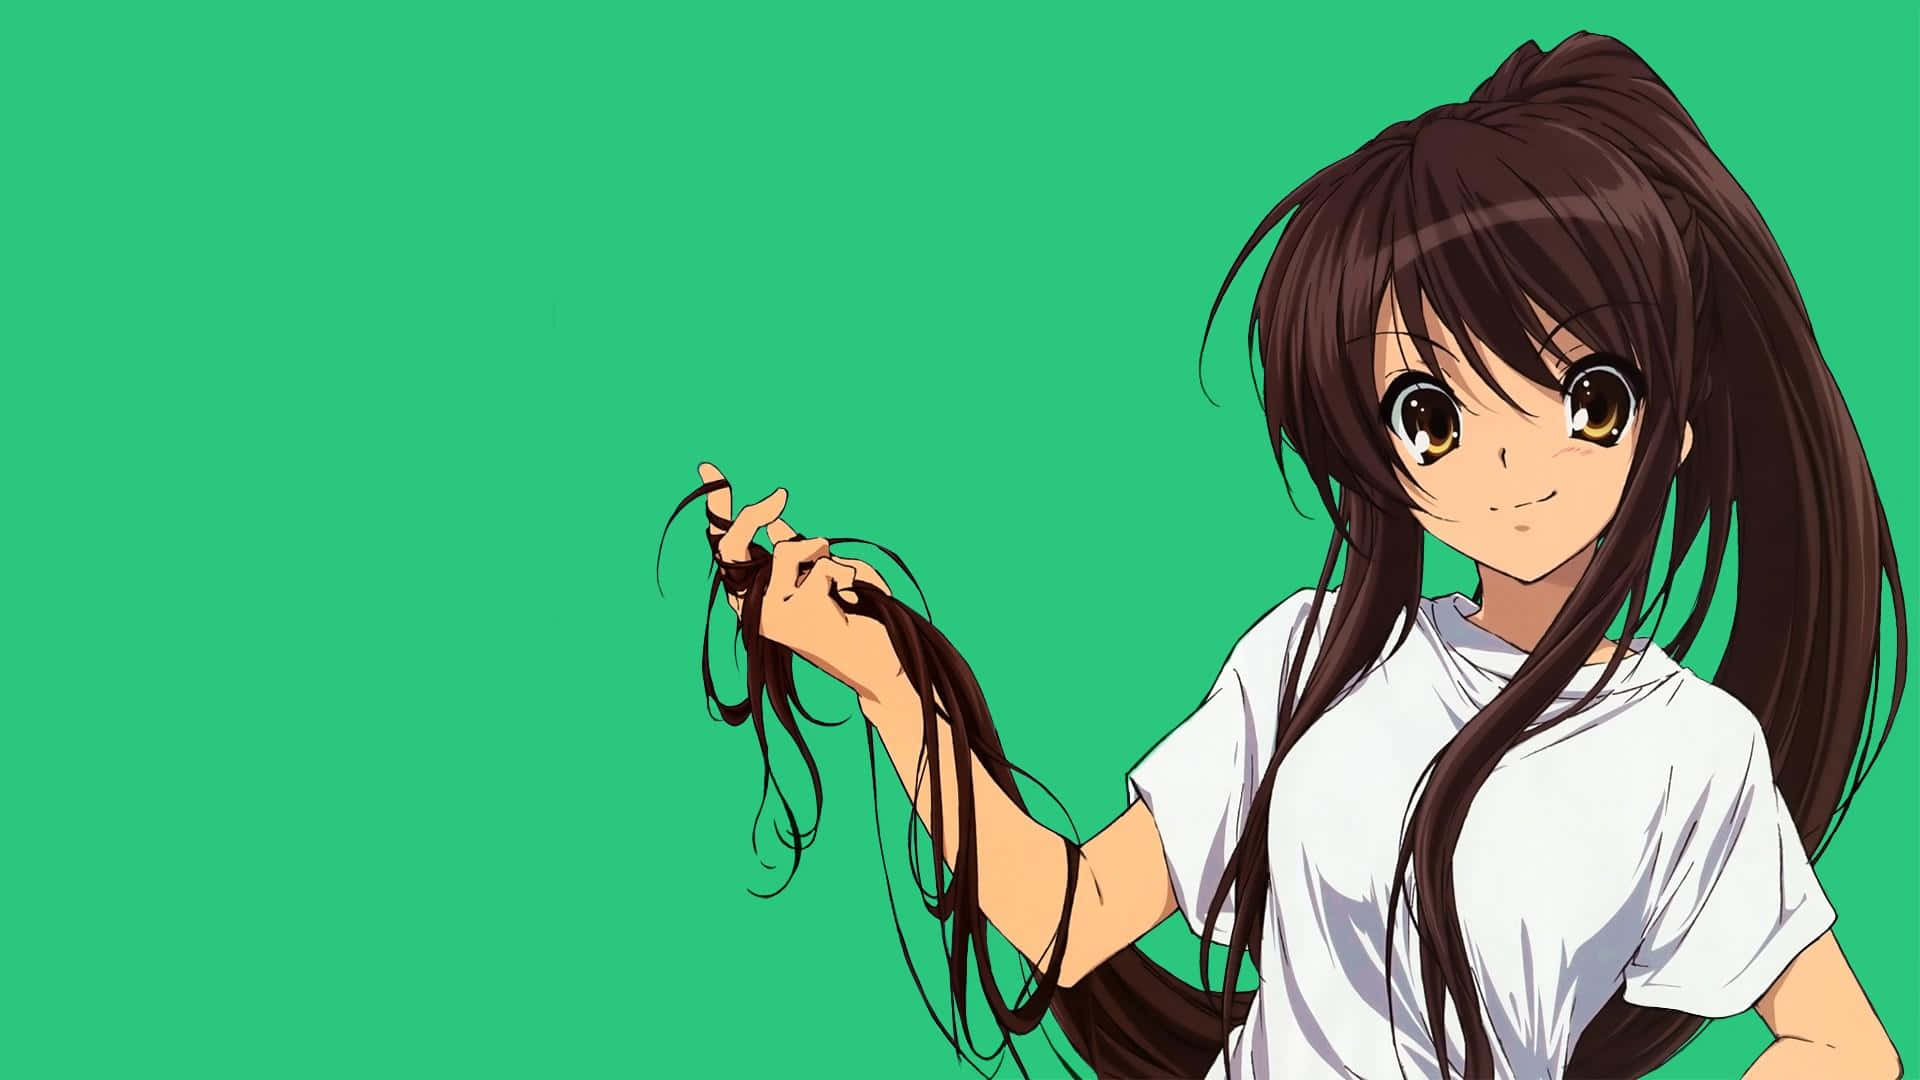 Haruhi Suzumiya posing cheerfully with her friends against a scenic backdrop. Wallpaper